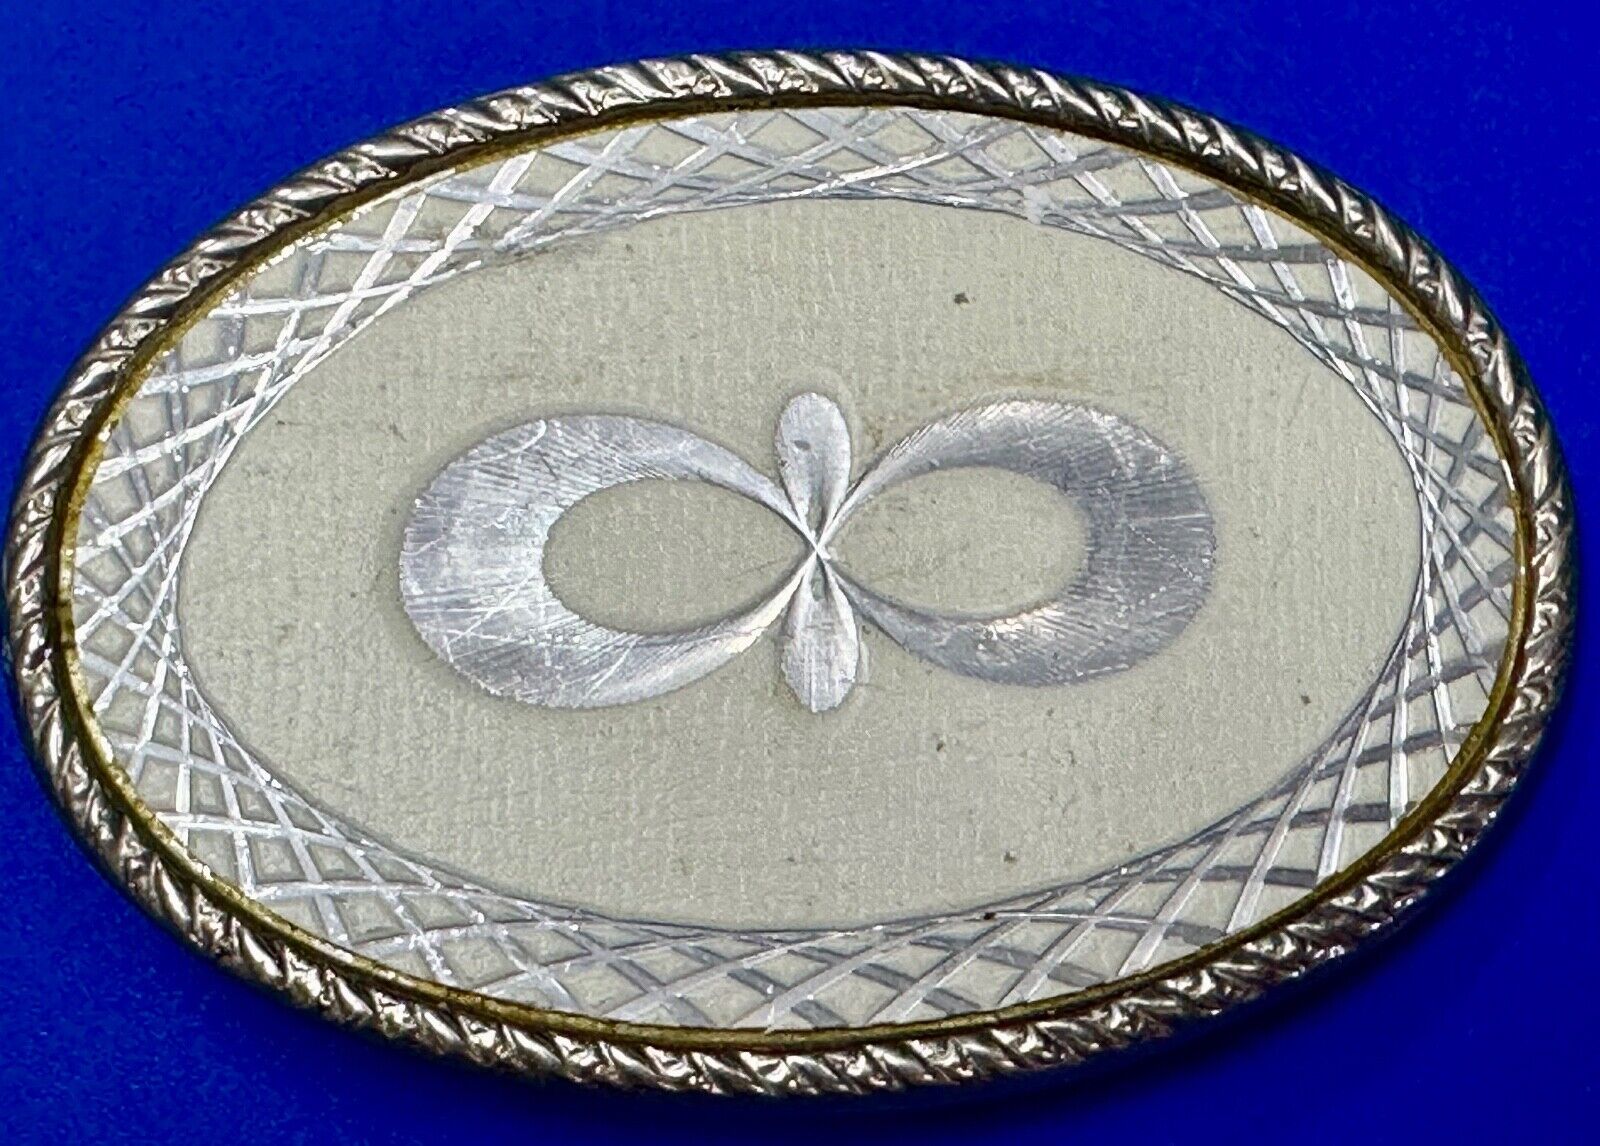 Vintage White & silver color etched oval western belt buckle marked W